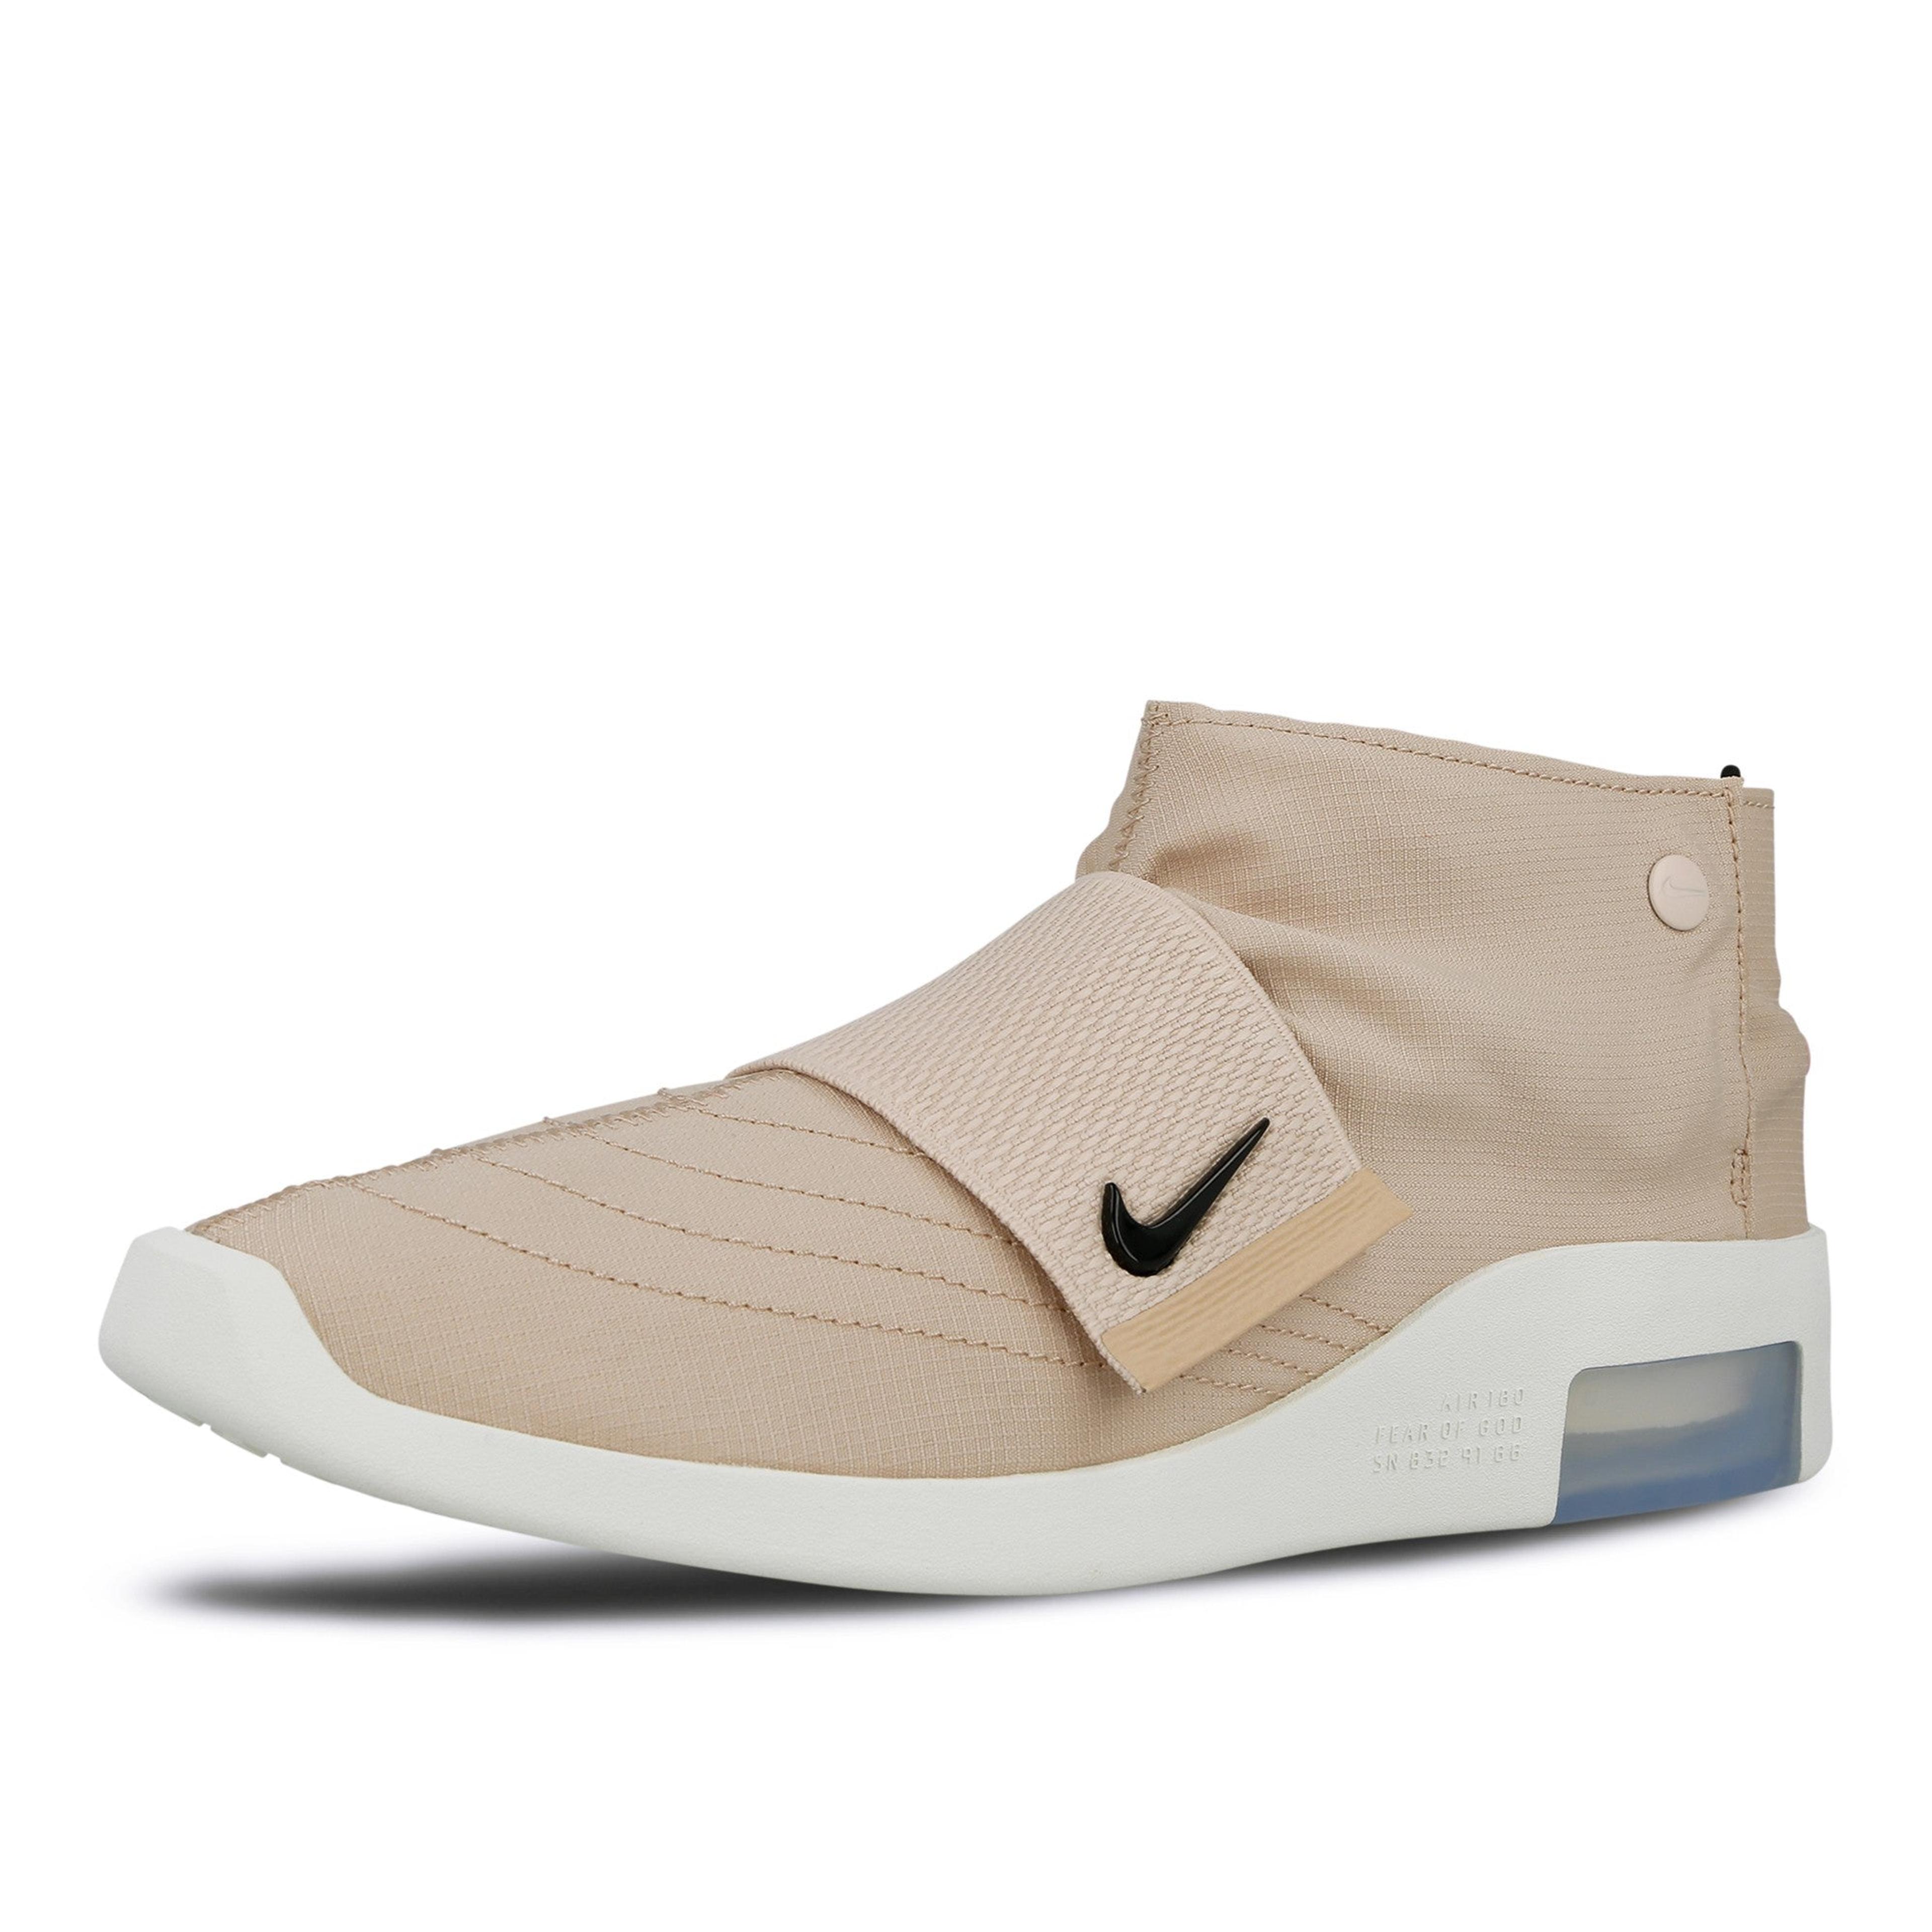 Alternate View 4 of Men's Nike Air X Fear Of God MOC "Particle Beige" AT8086 200